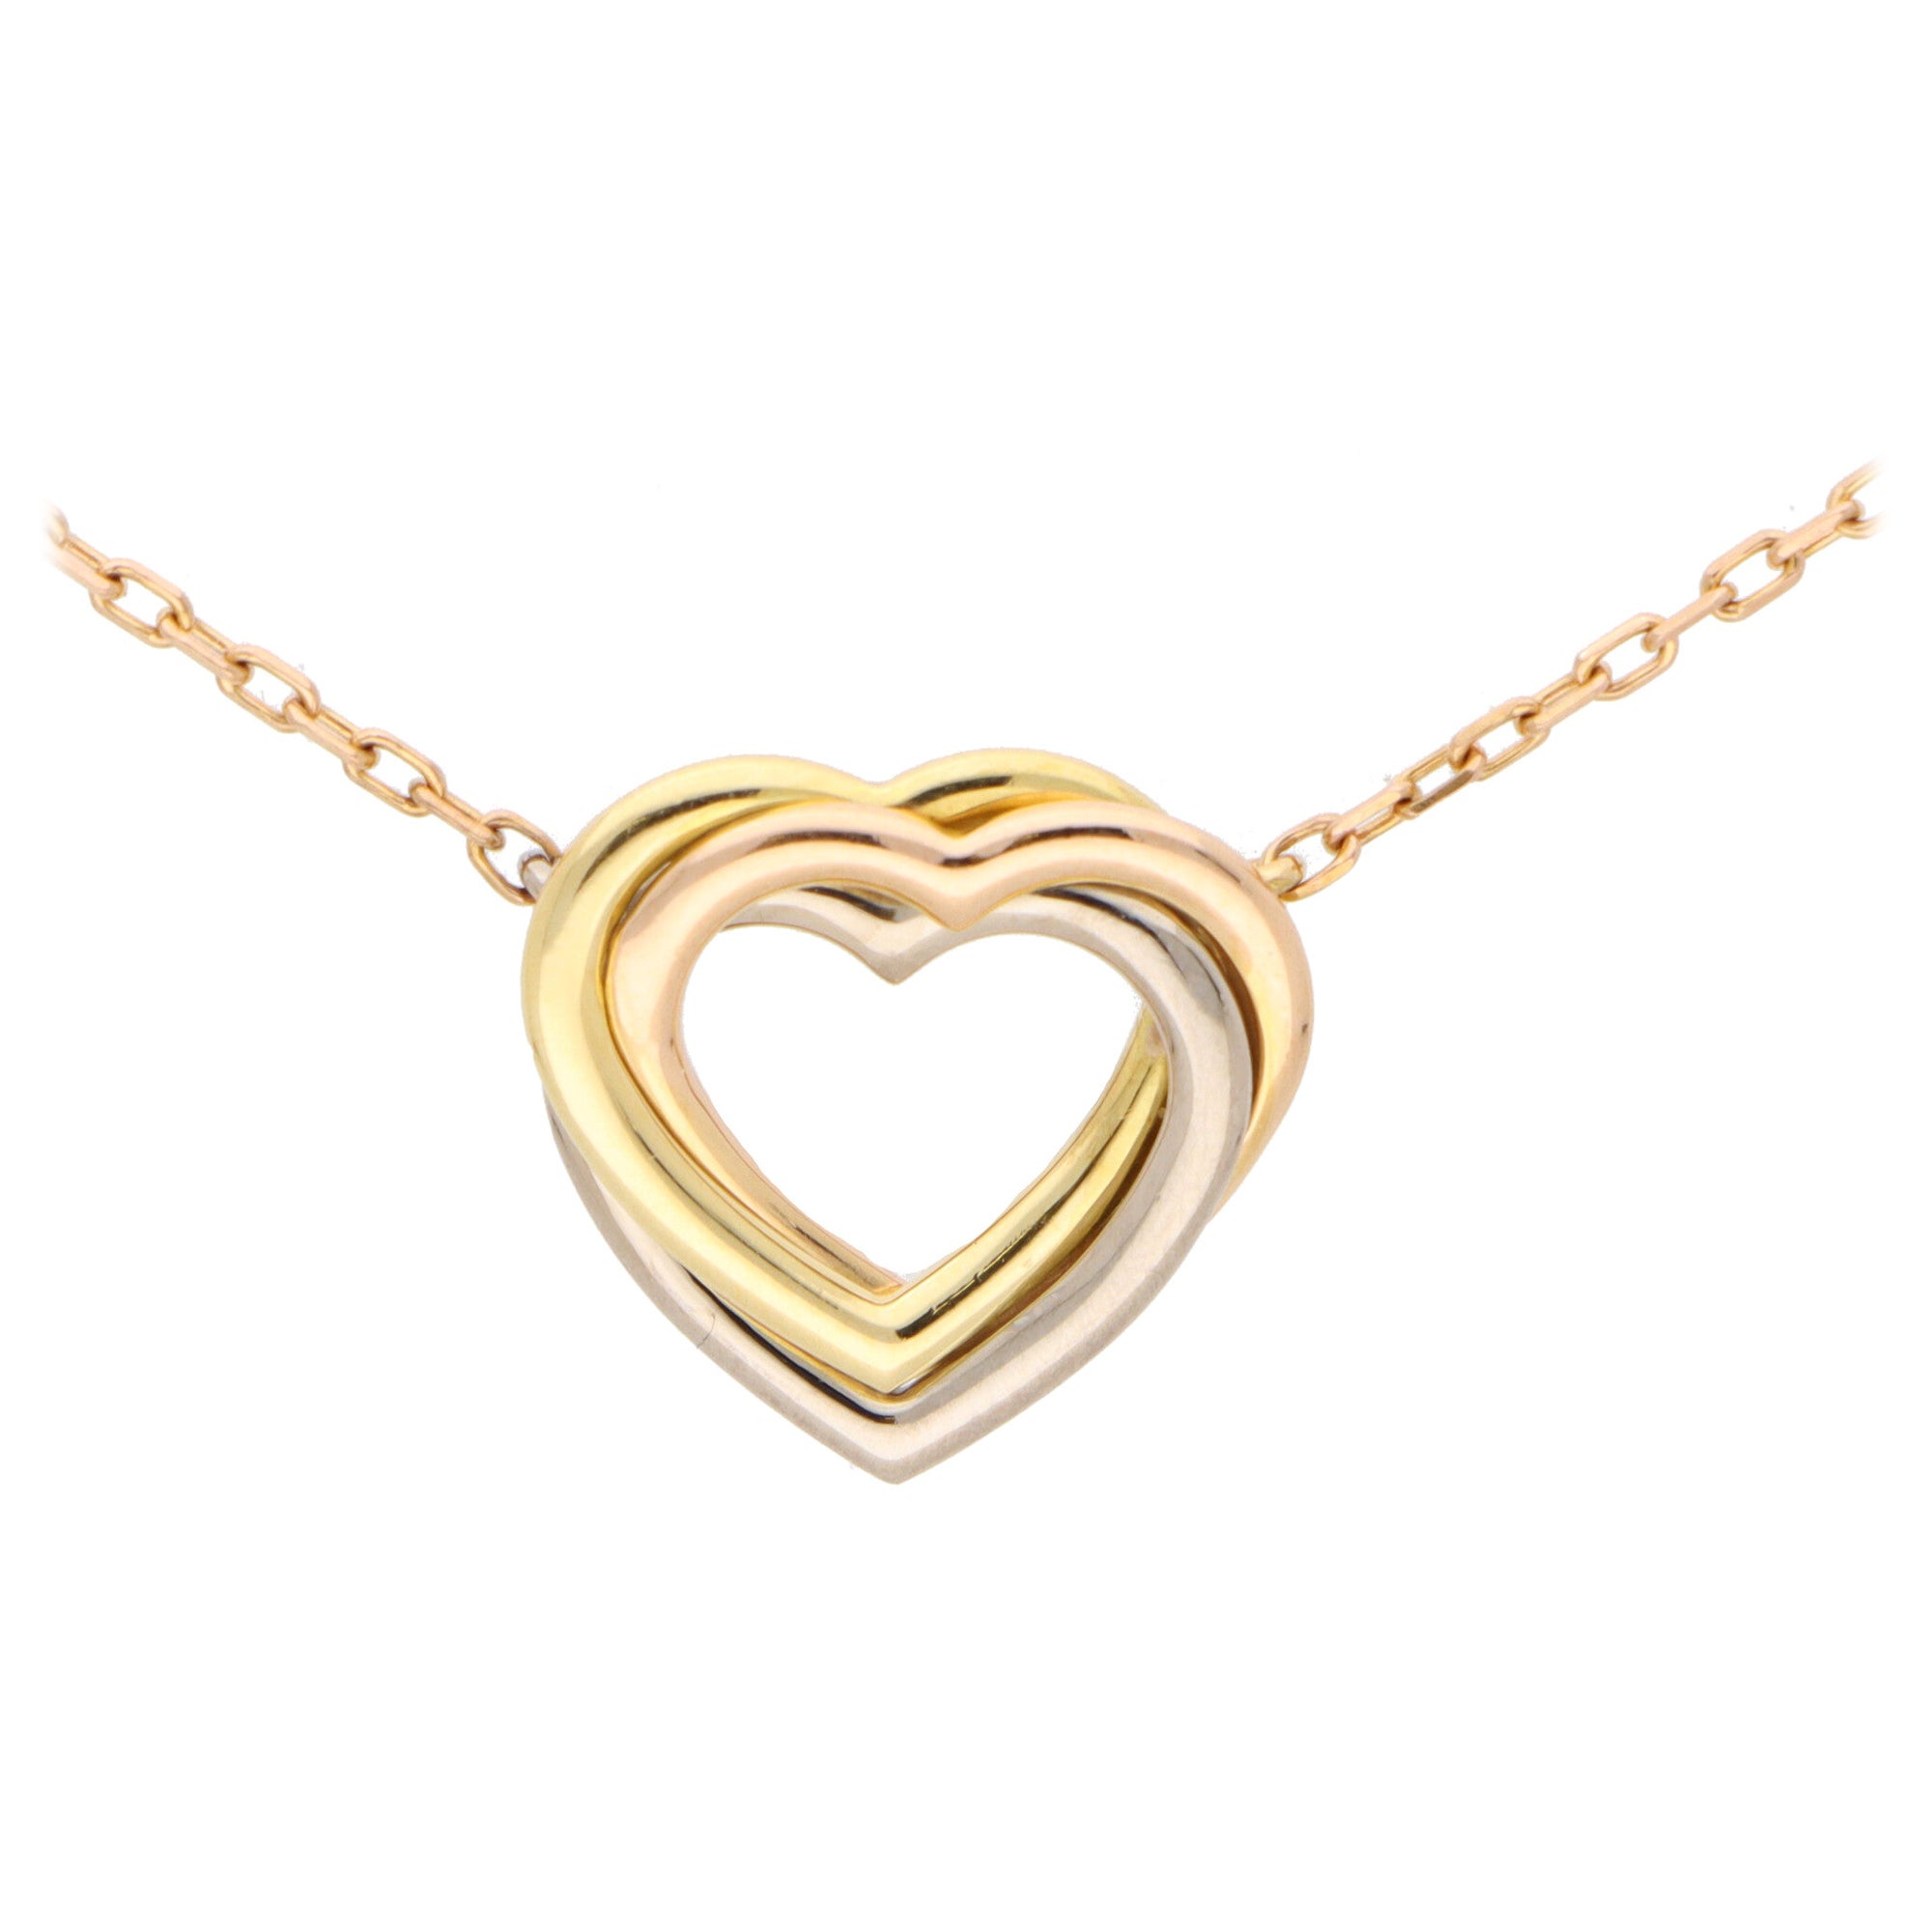 Vintage Cartier Open Heart Trinity Necklace Set in 18k Rose, Yellow & White Gold